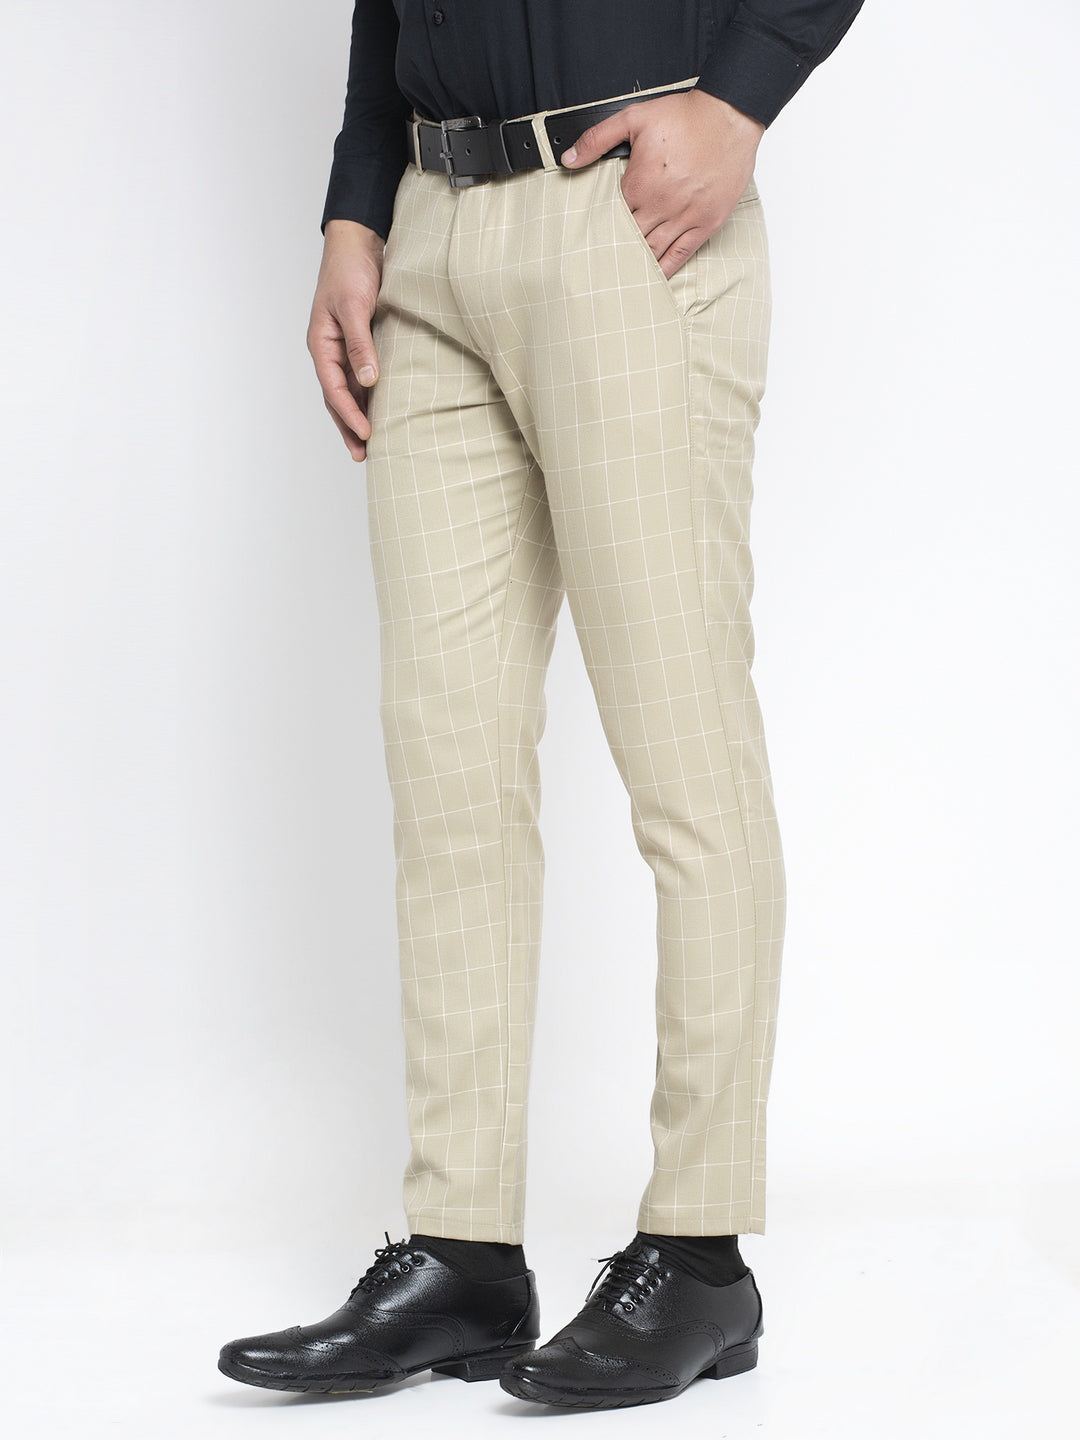 What colour shirt will be perfect for cream trousers  Quora